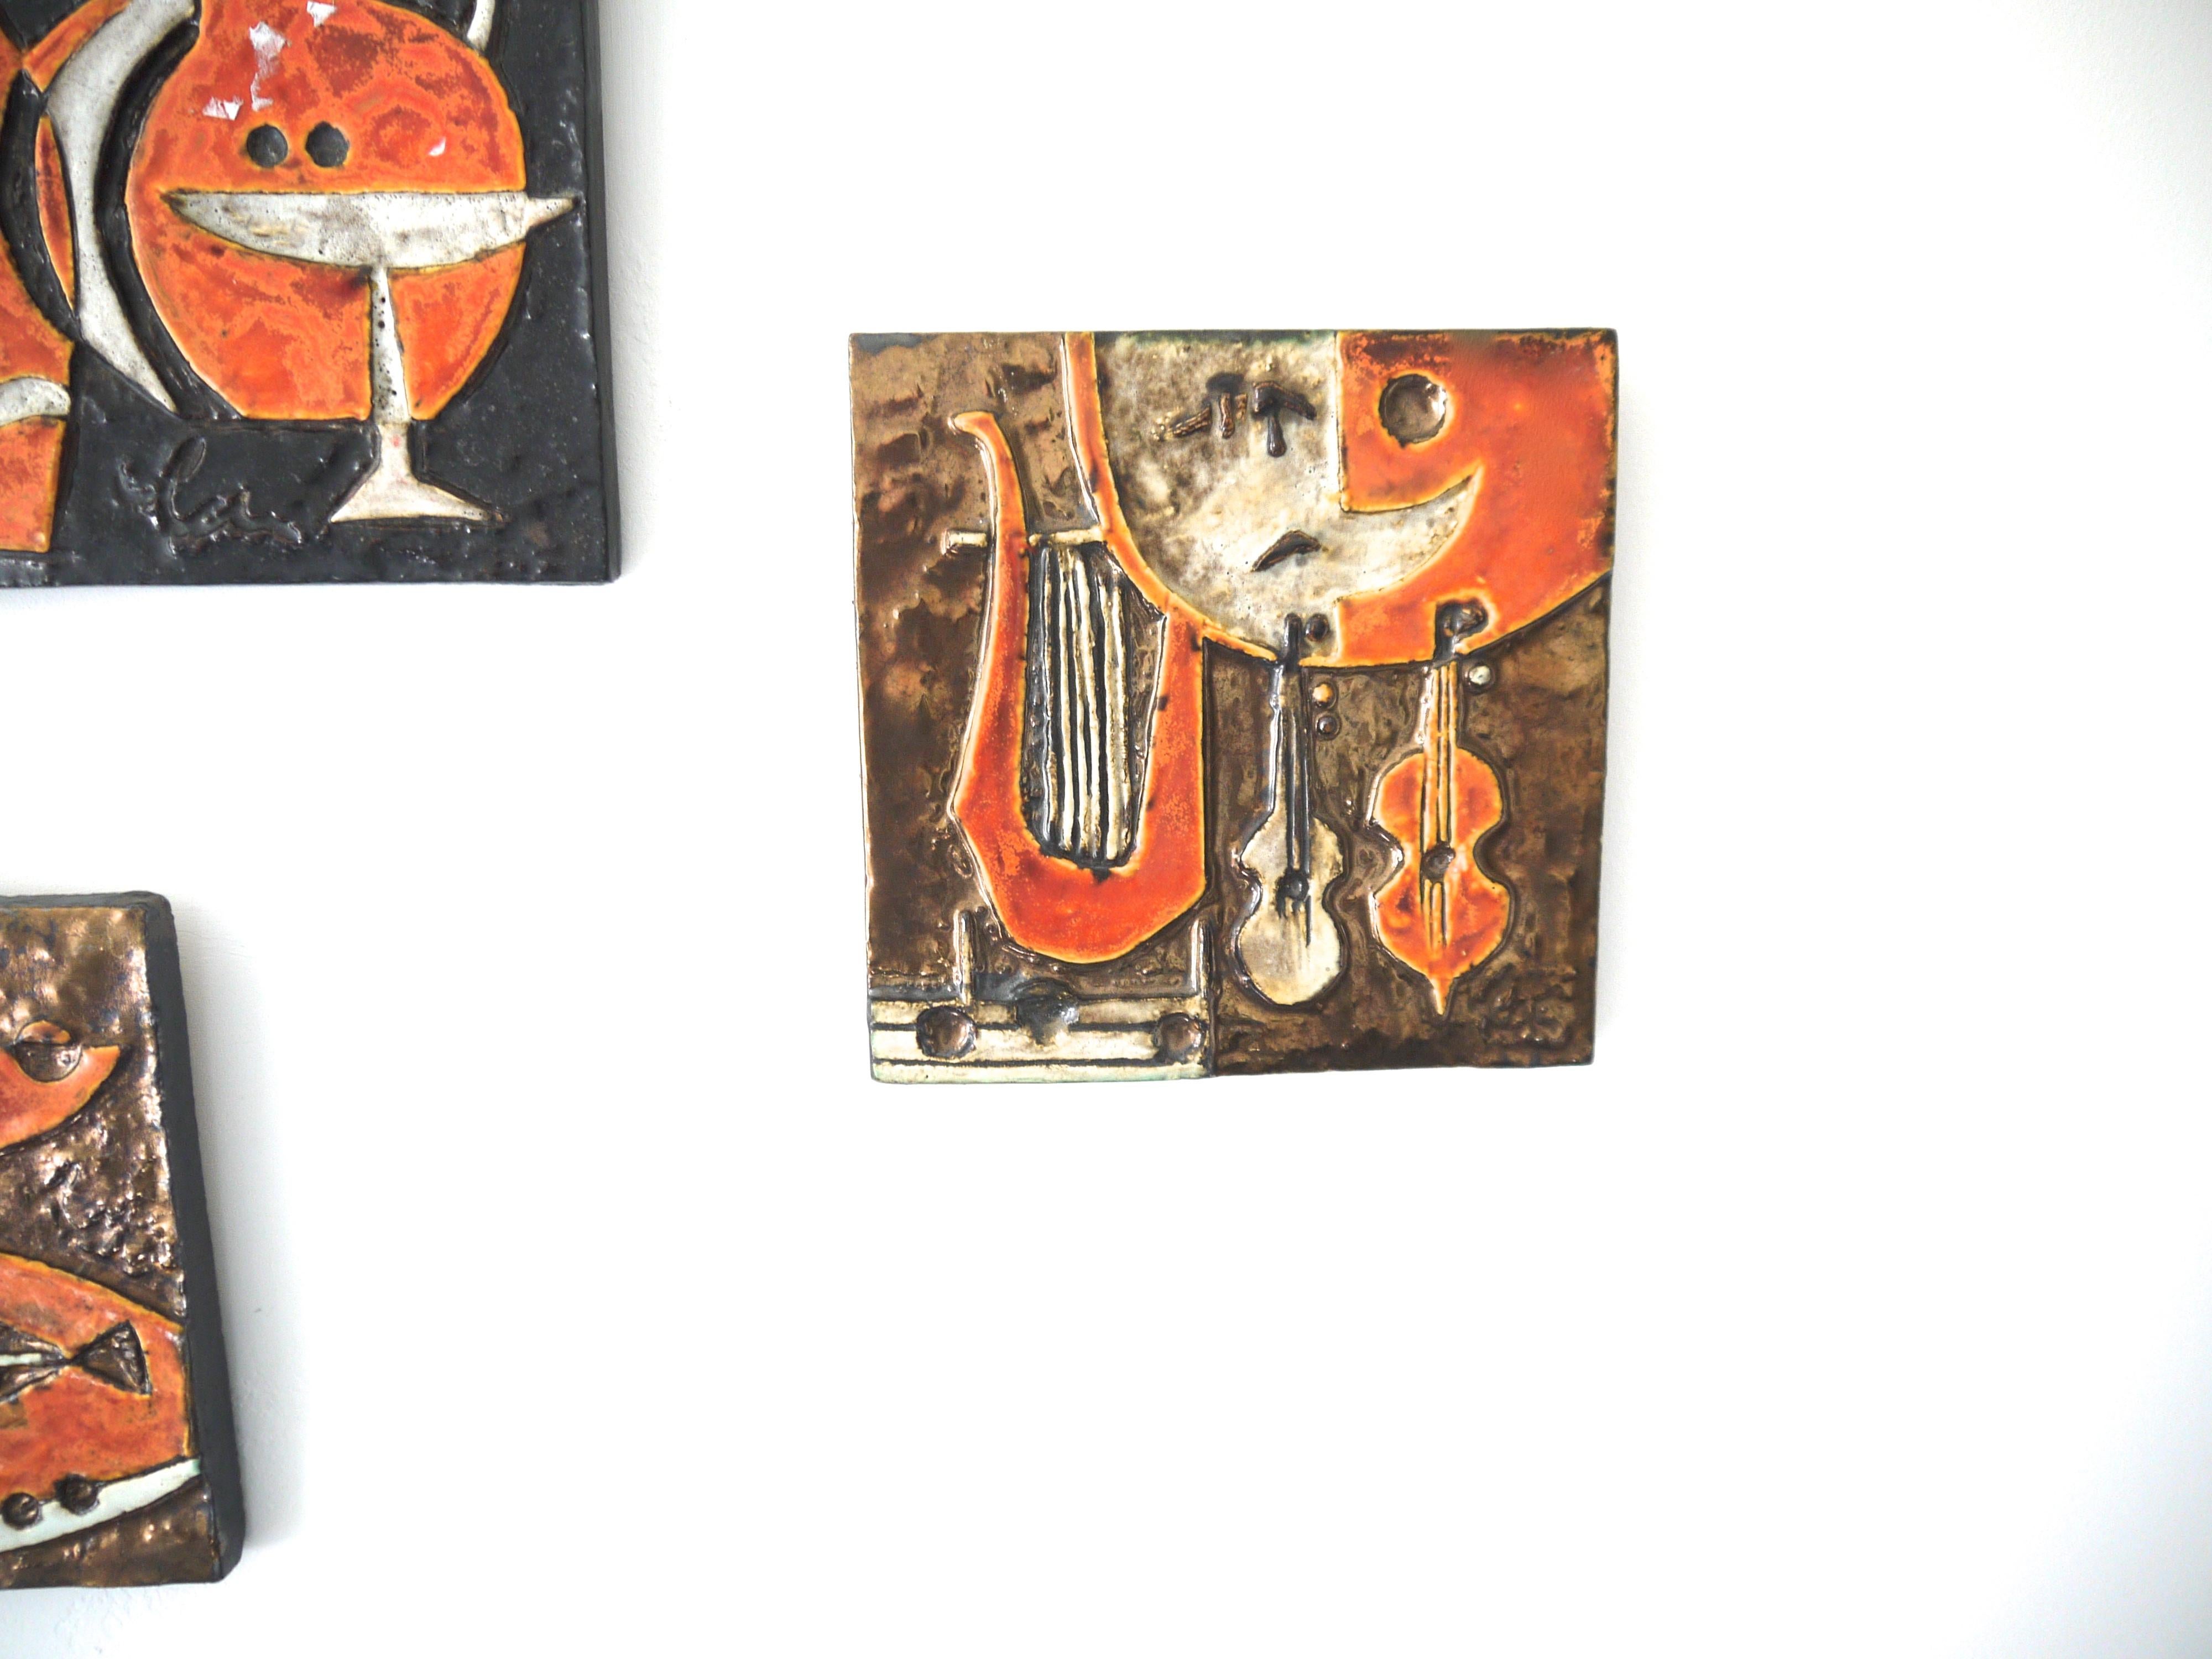 Modernist Ceramic Wall Plaques, Set of Three by Helmut Schaffenacker Late 1950s In Good Condition For Sale In Halstead, GB